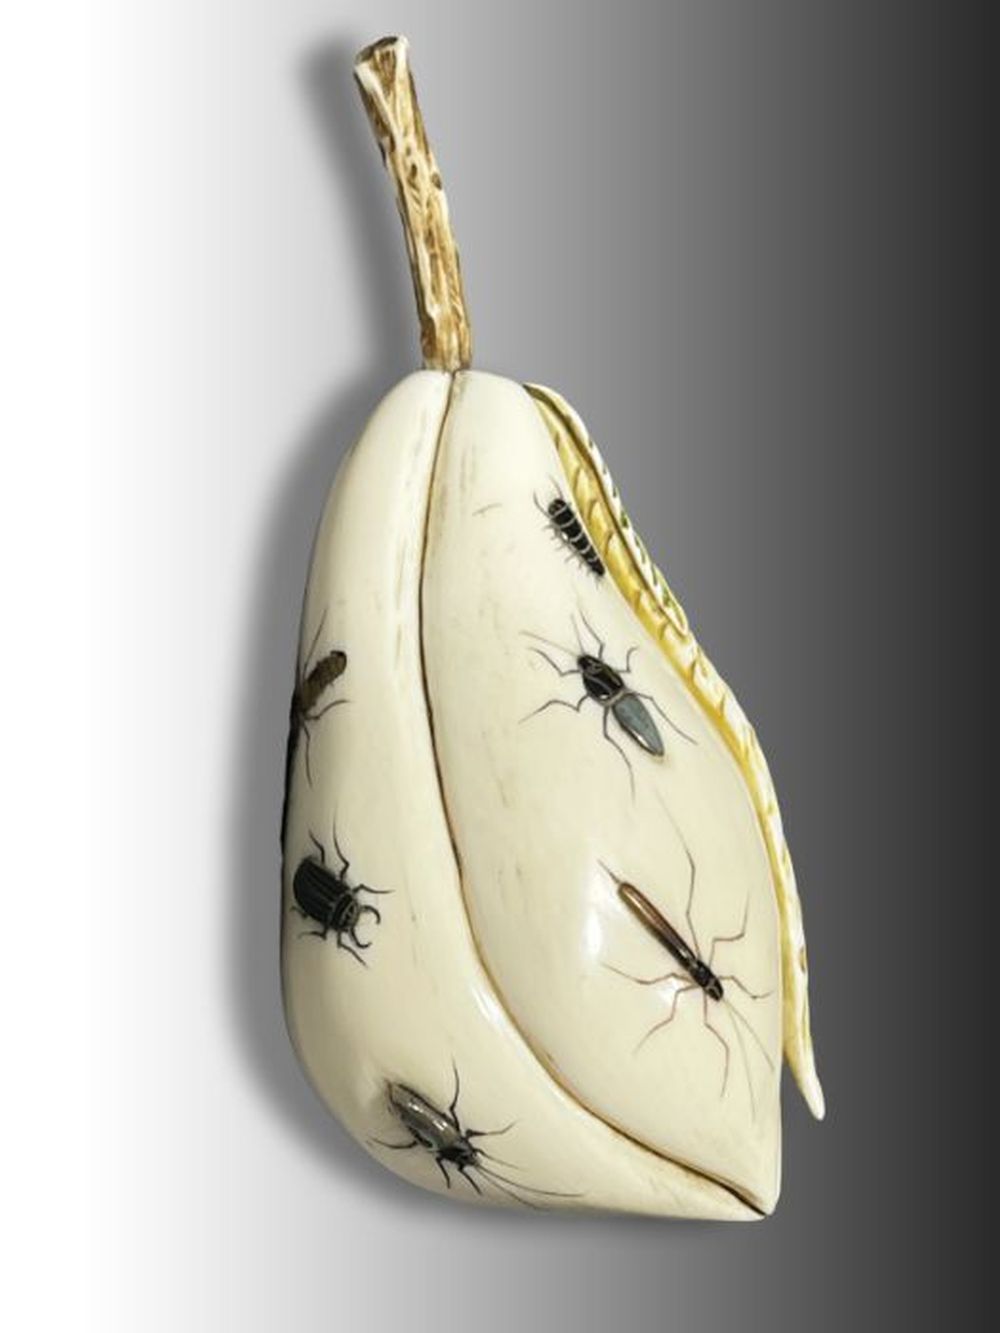 A JAPANESE SHIBAYAMA OKIMONO OF A PEAR WITH MOTHER OF PEARL BUG INLAYS, SIGNED M&hellip;